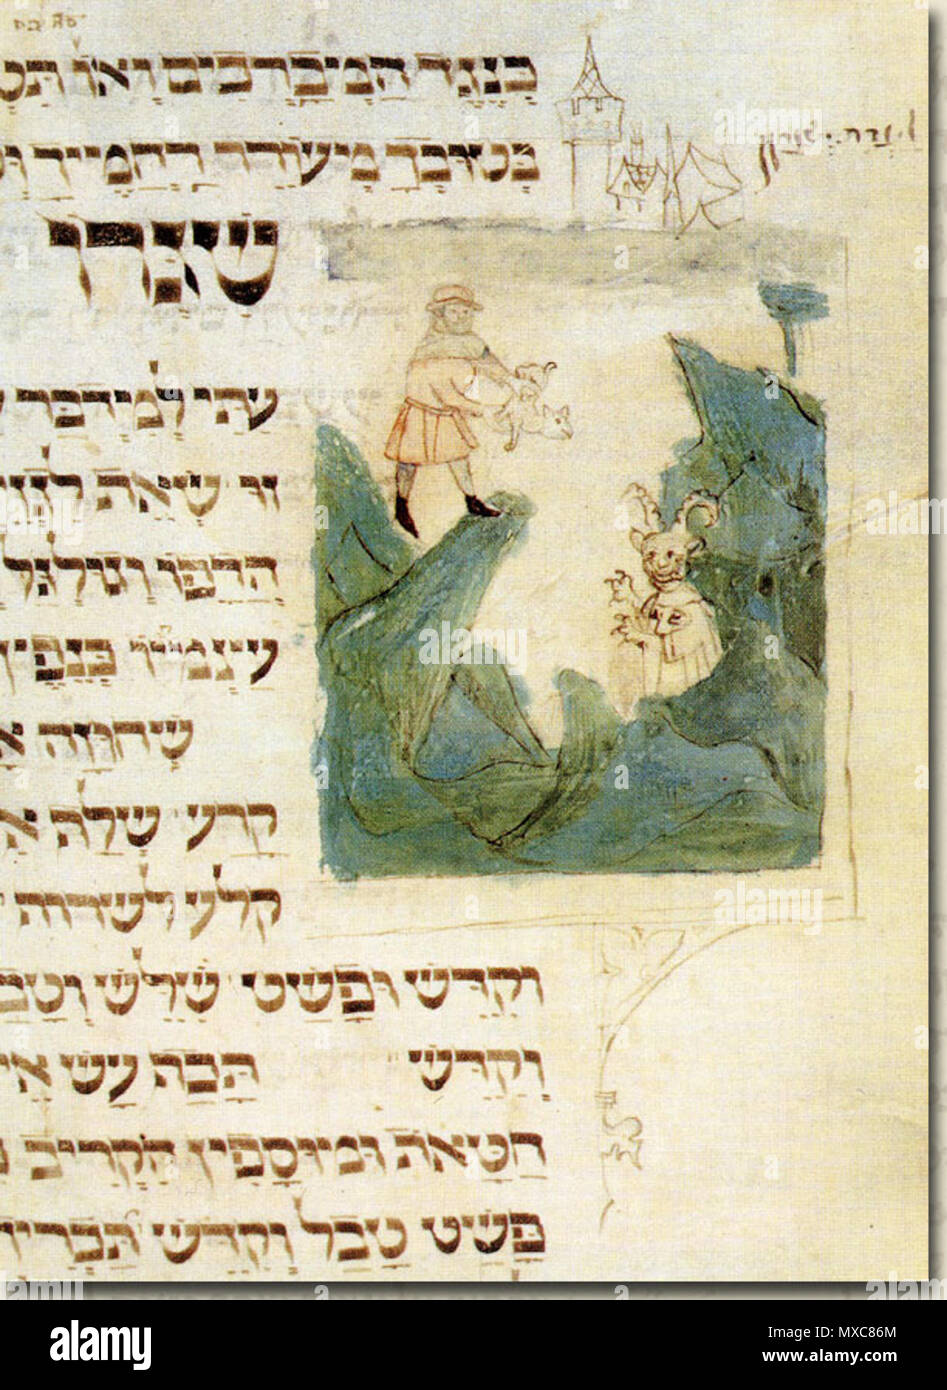 . English: In accordance with the tradition for the Day of Atonement (Yom Kippurim) in Leviticus 16:22, a scapegoat is cast from Mount Azazel into the abyss, to Azael, who appears as a horned and clawed mountain demon or devil. Illustration from a Machzor produced in Germany, perhaps Heilbronn, between 1370 and 1400 (MS Kaufmann A 387). 14th century. Unknown 294 Illustration-azazel Stock Photo